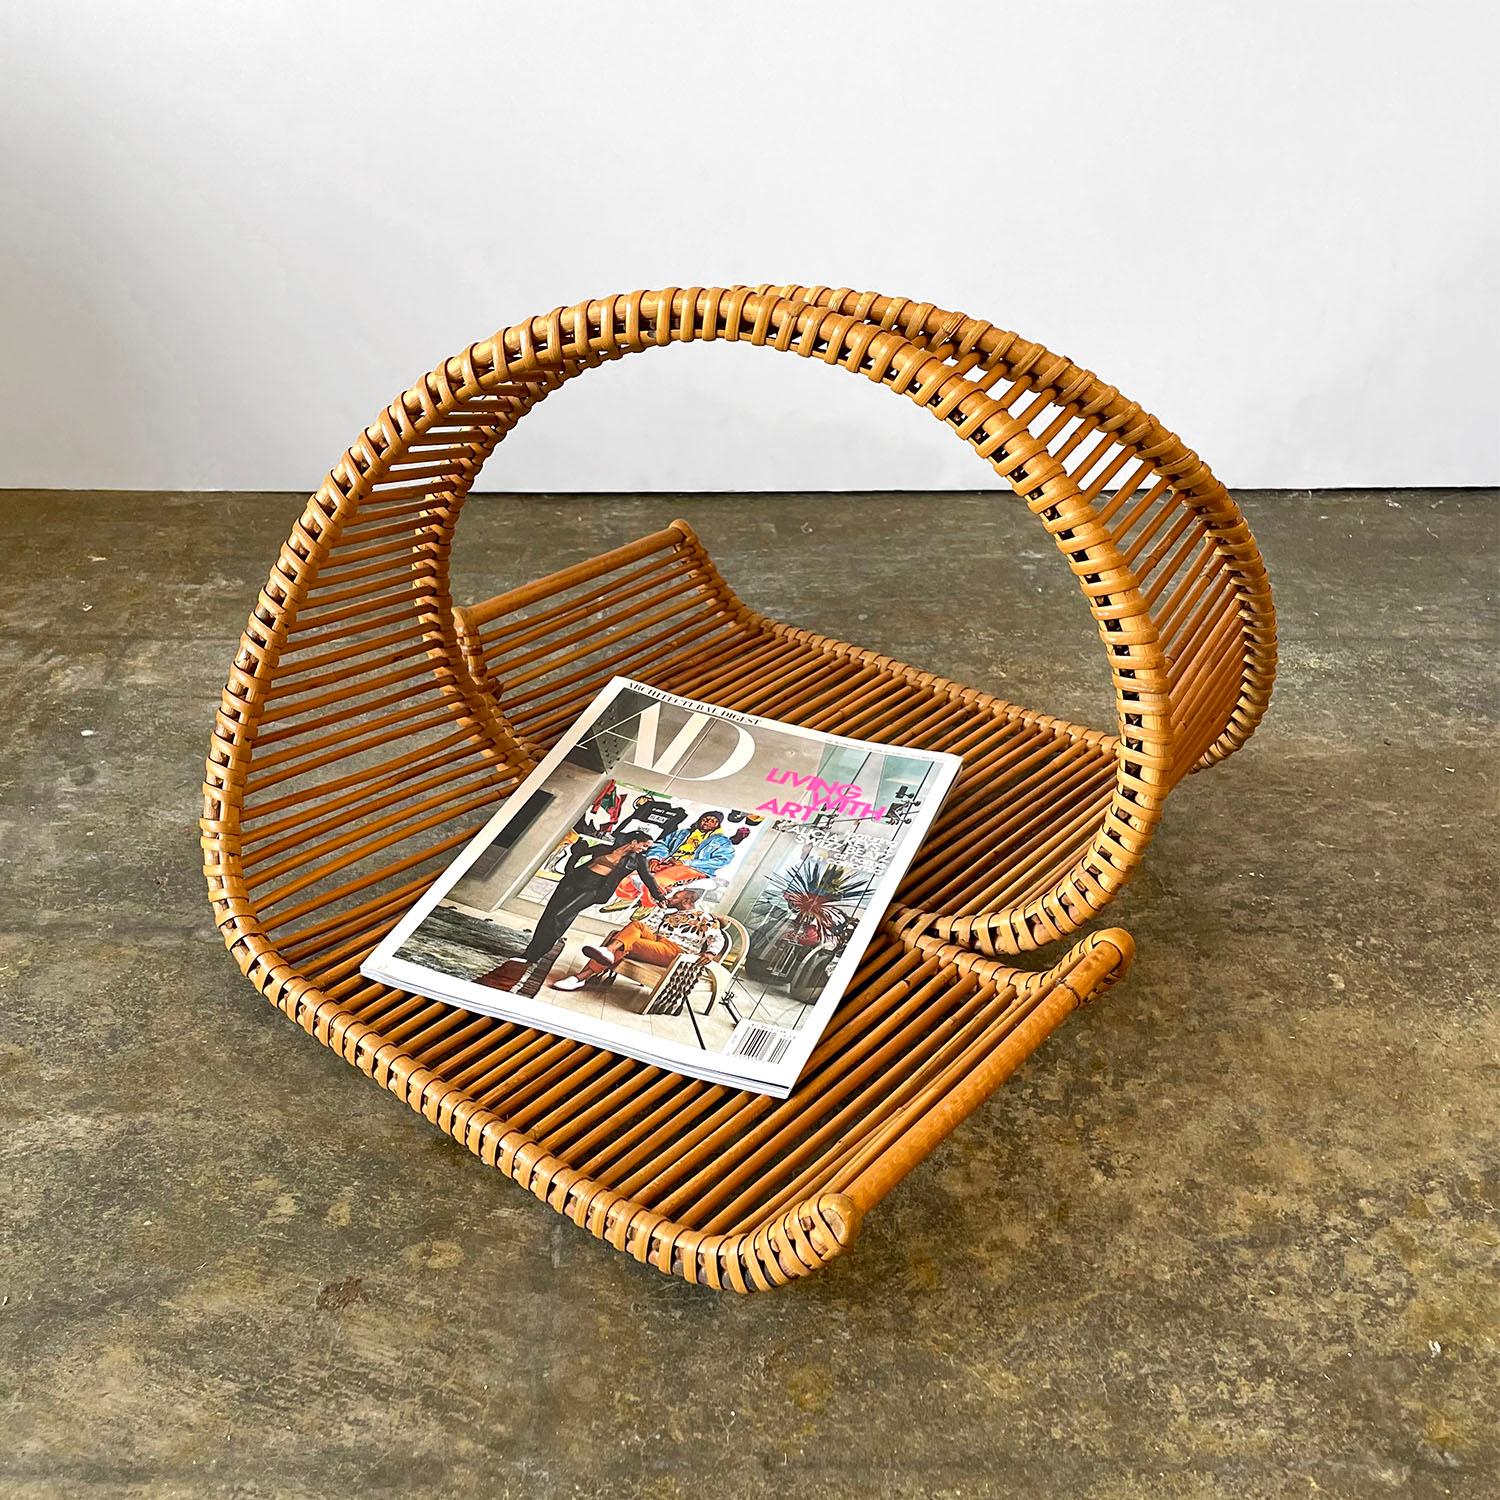 Italian rattan magazine holder 
This dramatic statement piece is an artisanal masterpiece 
Beautifully sculpted hand woven rattan reeds are formed into a transcendent wave pattern 
Each side holds two full size magazine storage spaces 
Natural color